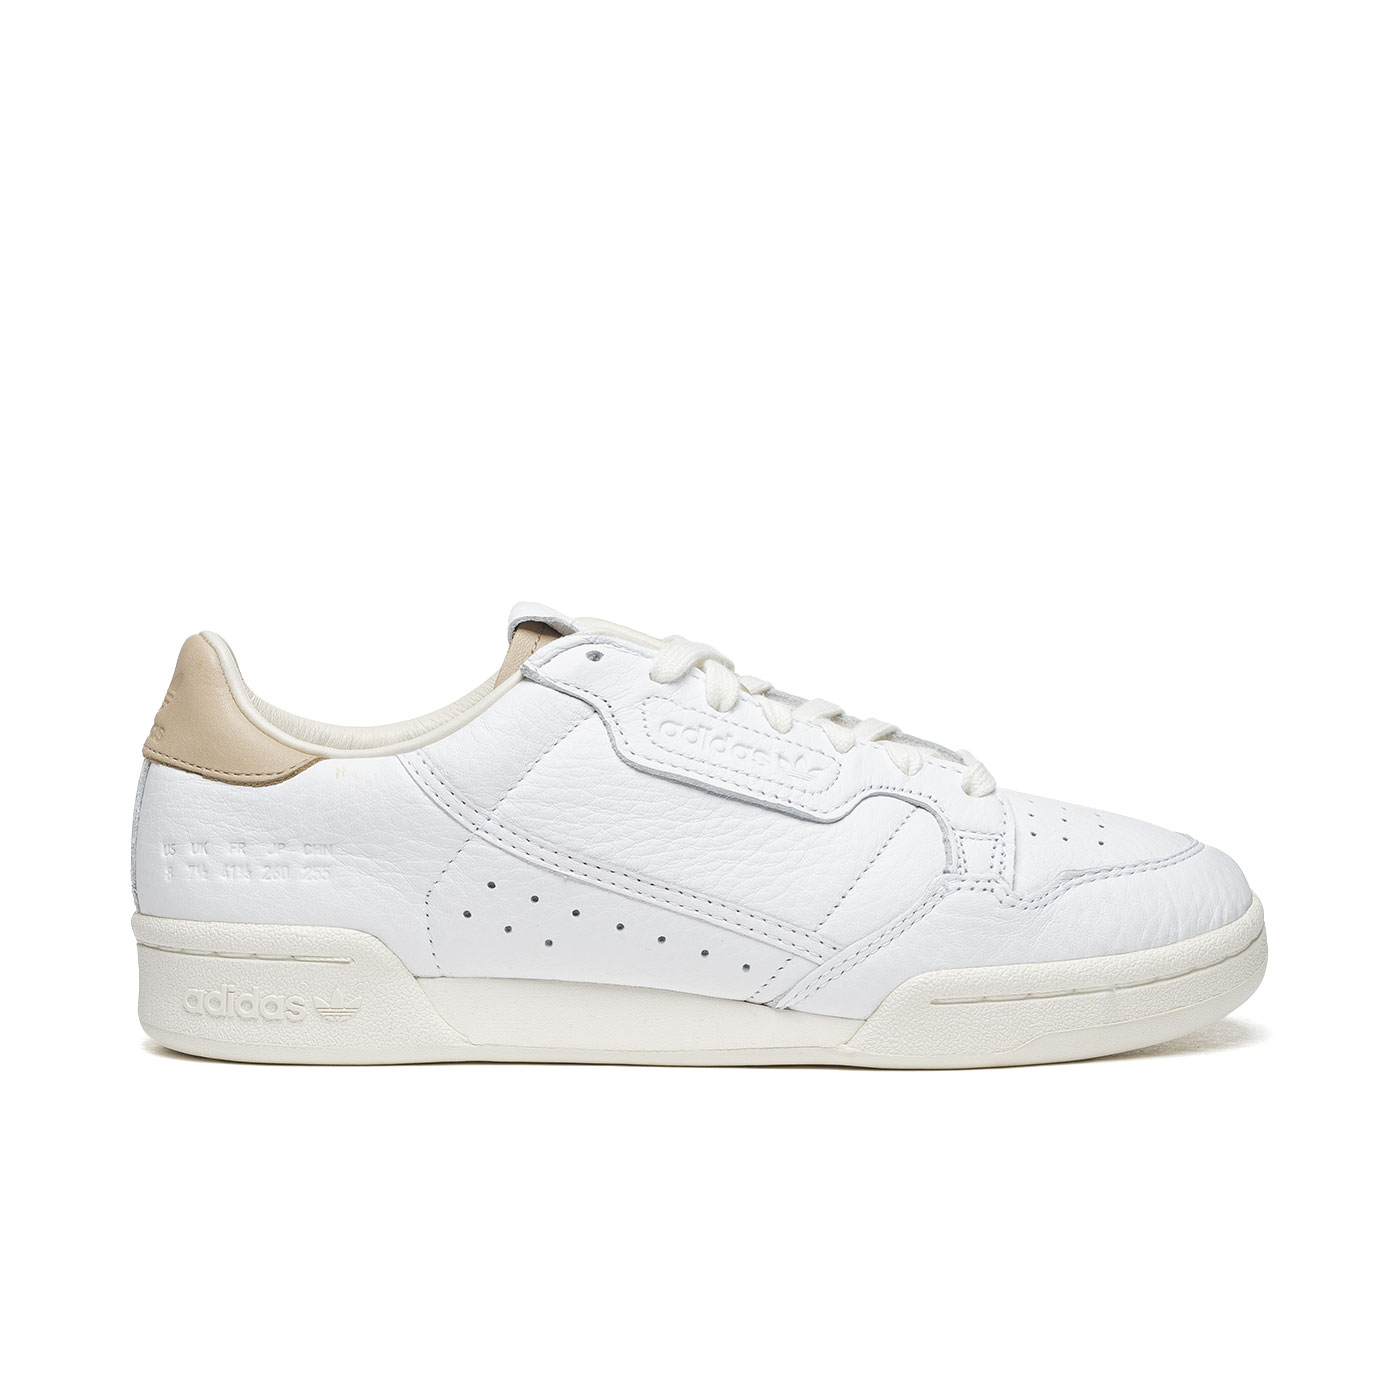 Cubeta Gran roble río adidas bb7370 pants size chart | FY5469 | Sneakers ADIDAS Continental 80  White for Man | TrustyShops